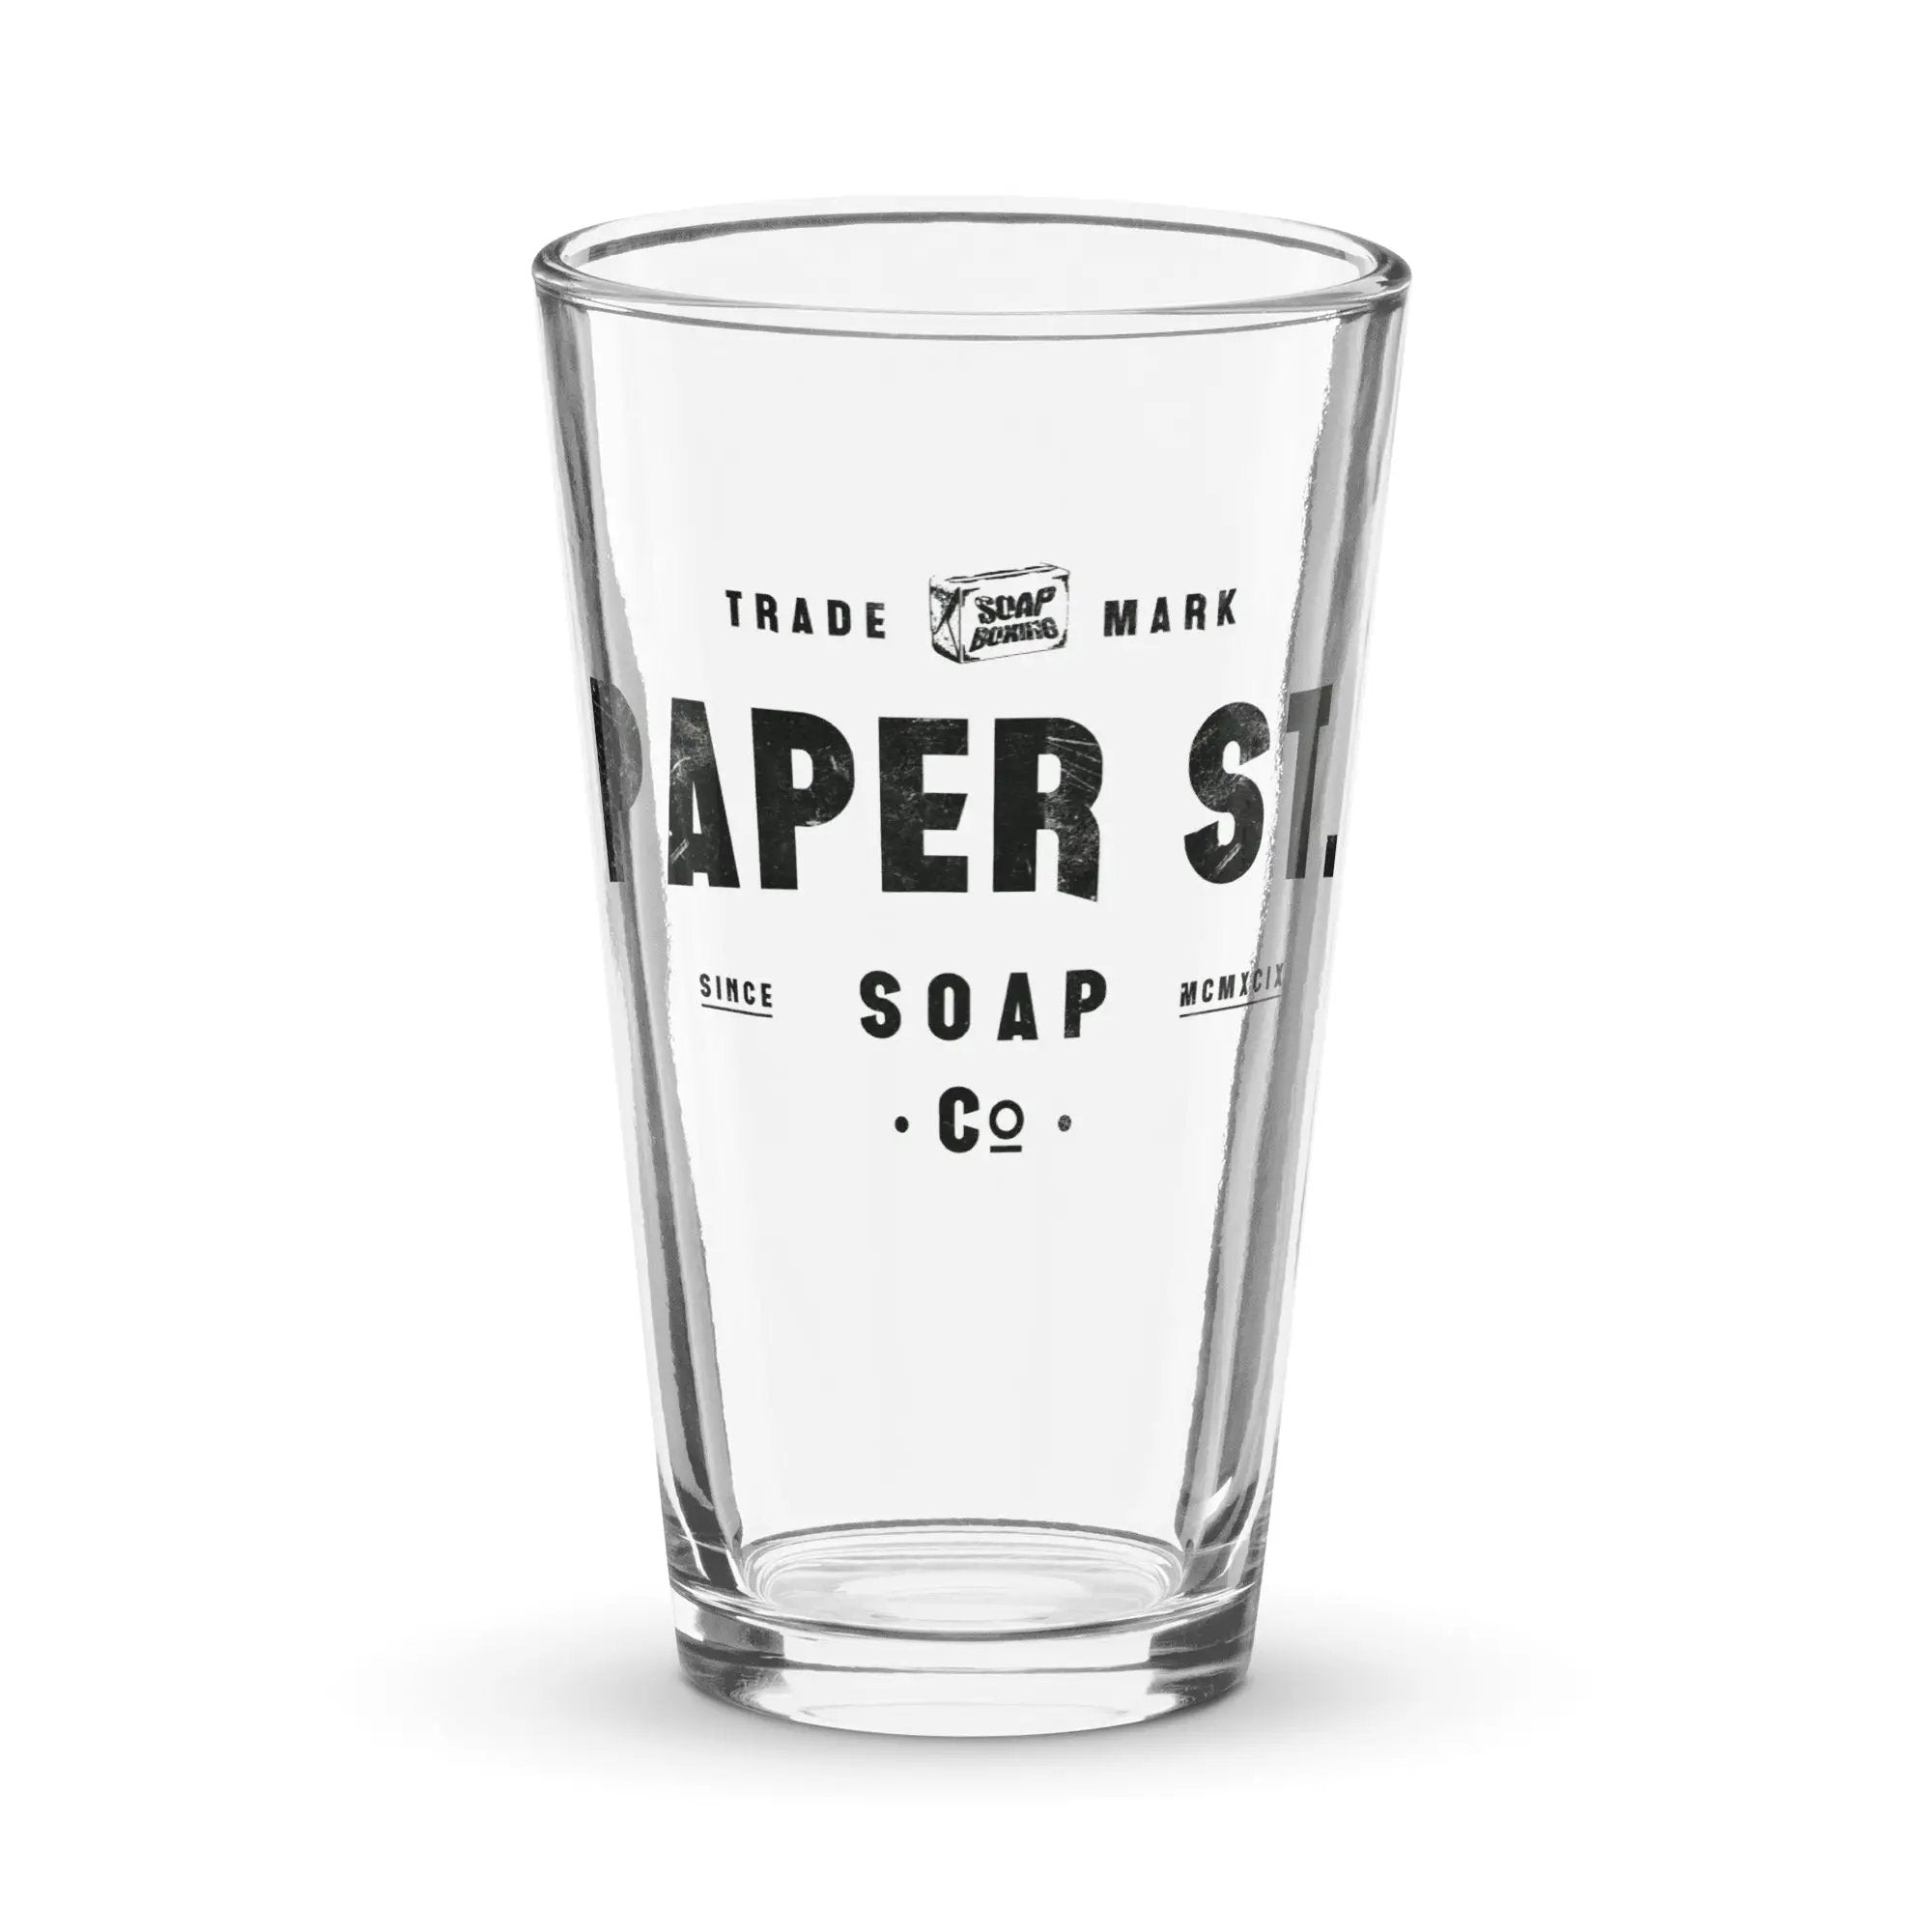 a clear glass with a black and white label on it